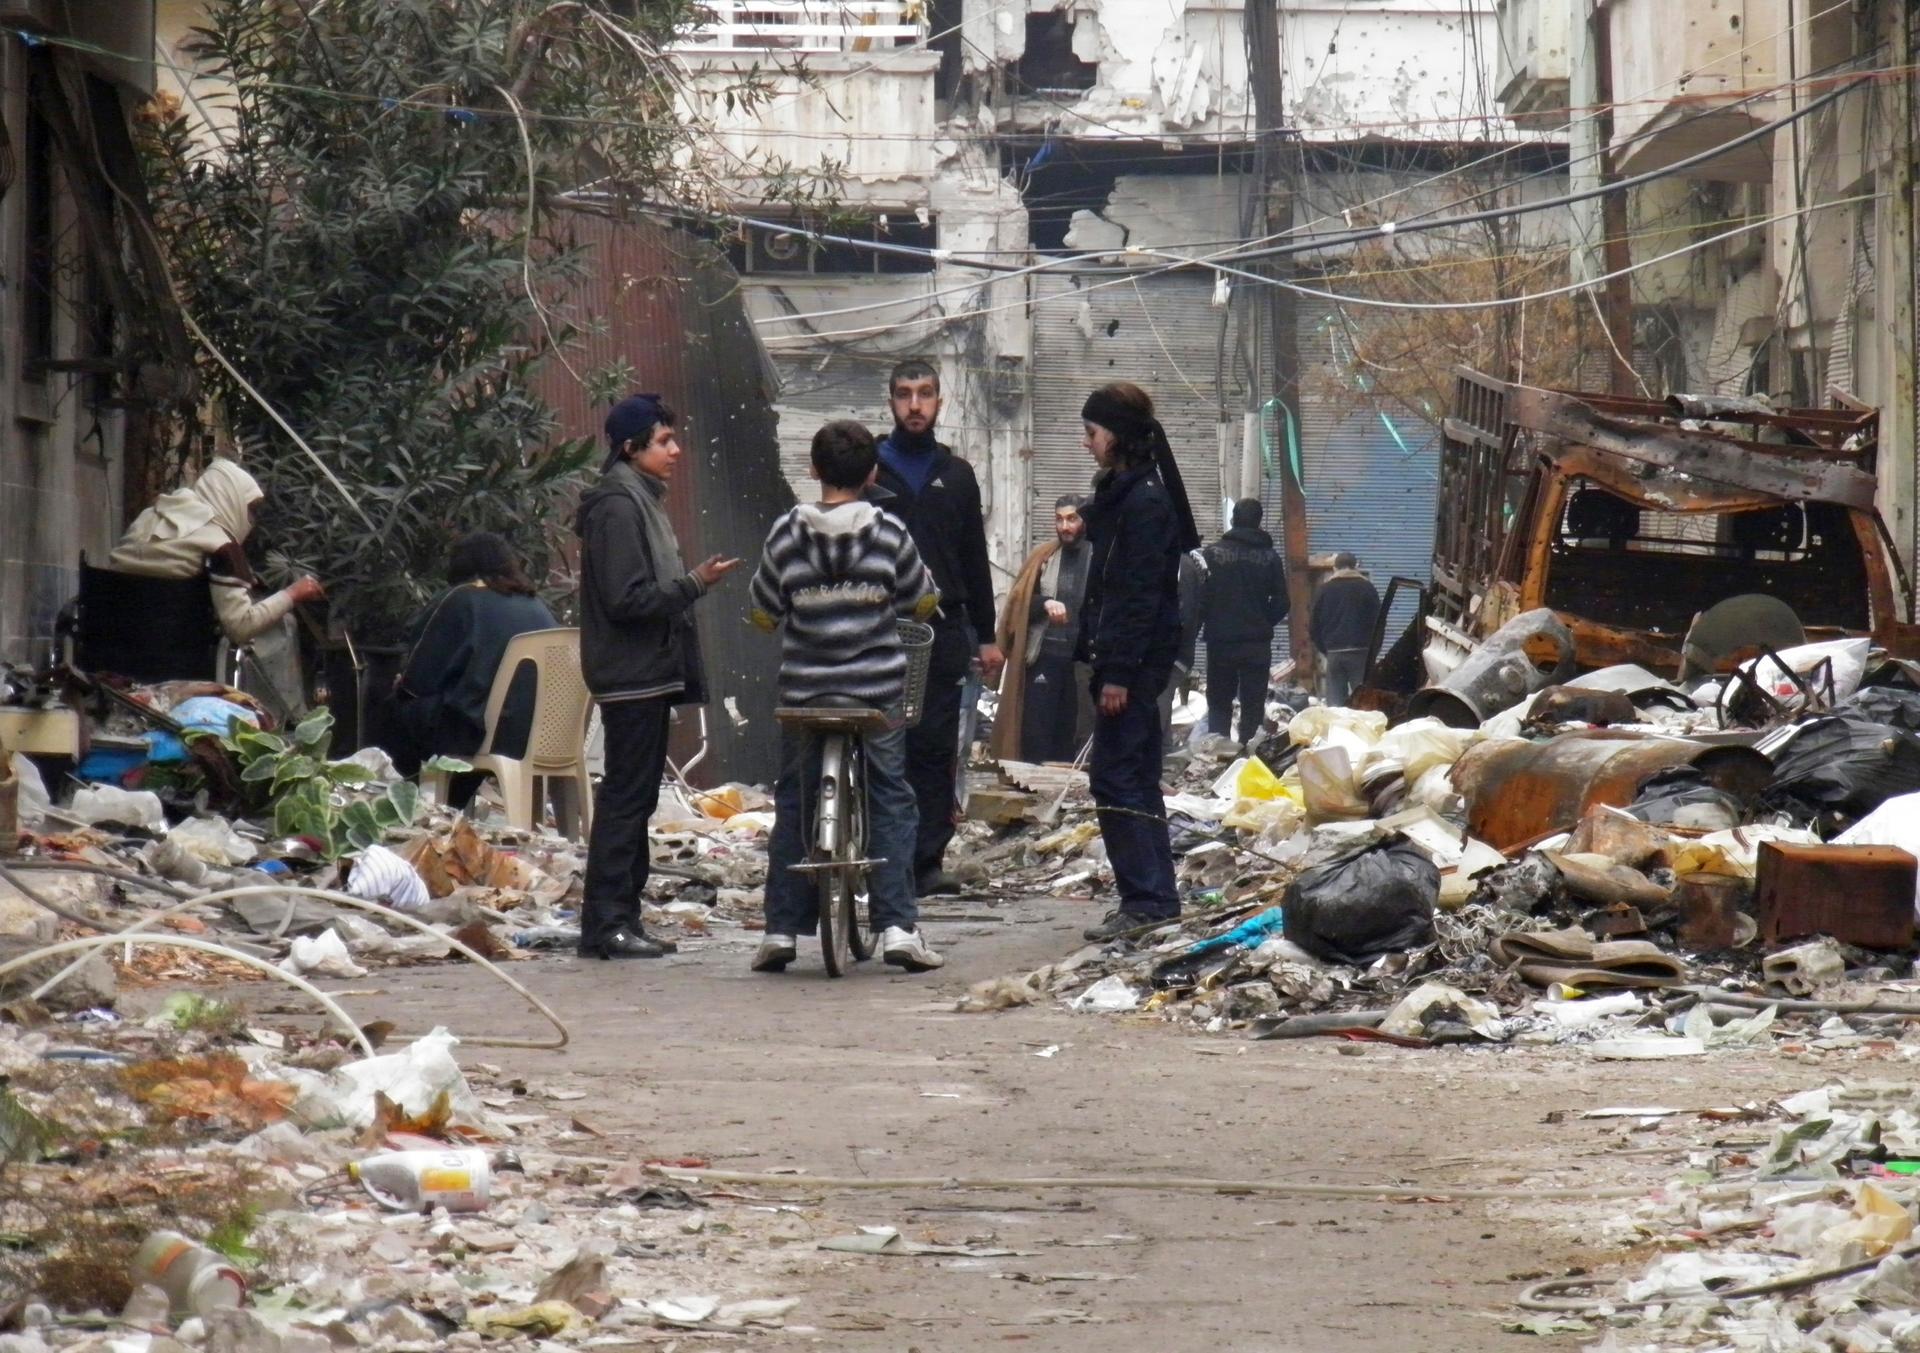 Civilians stand along a street in Homs. Washington called on the Syrian government on Monday to allow aid convoys into Homs, where "people are starving", and said that all civilians must be allowed to leave the besieged area freely.